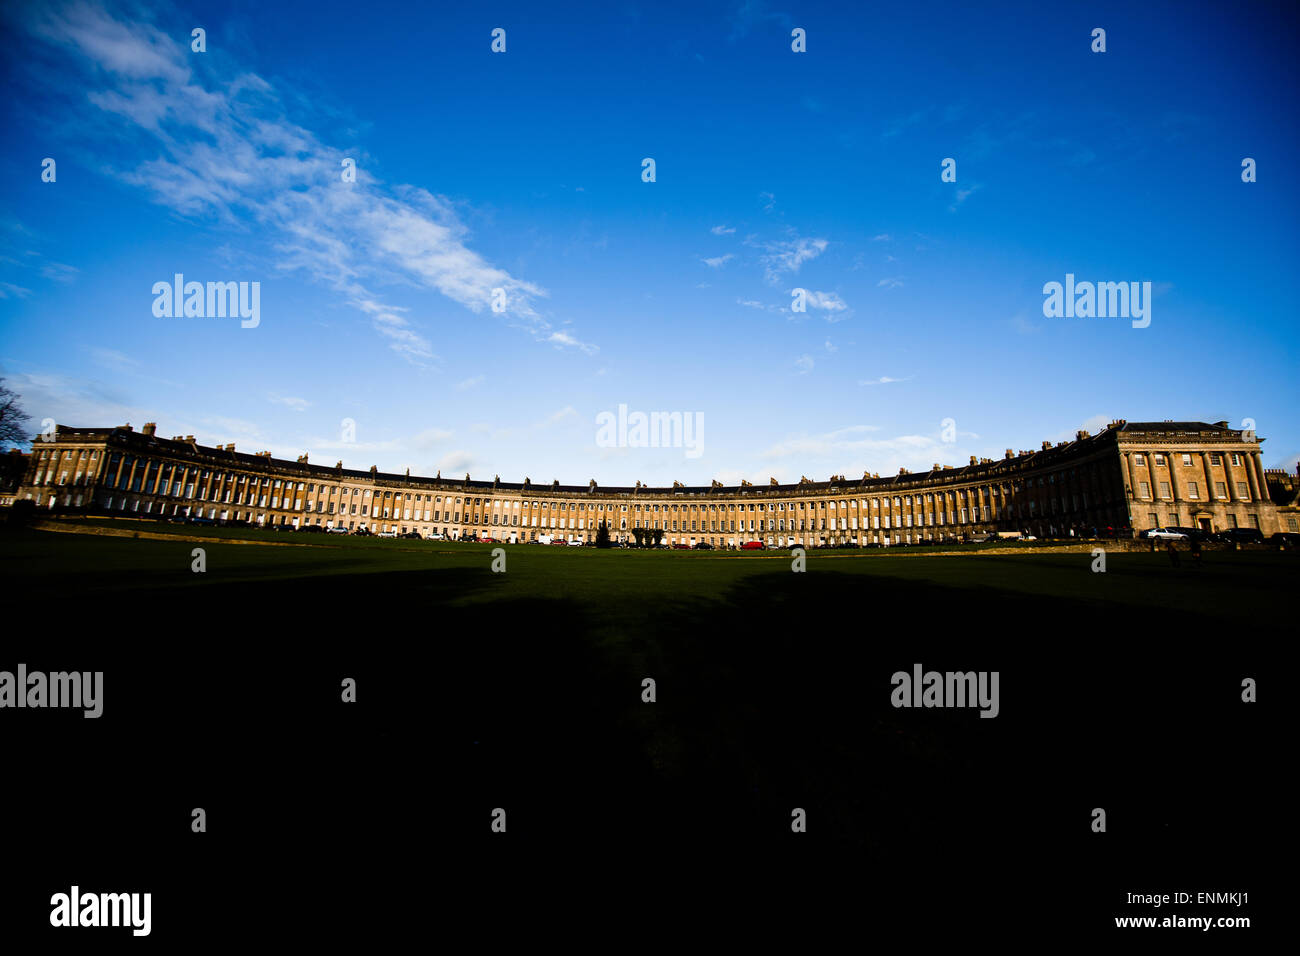 Bath, UK: curving architecture of Bath. Rowhouse city blocks shadowed in afternoon light. Stock Photo